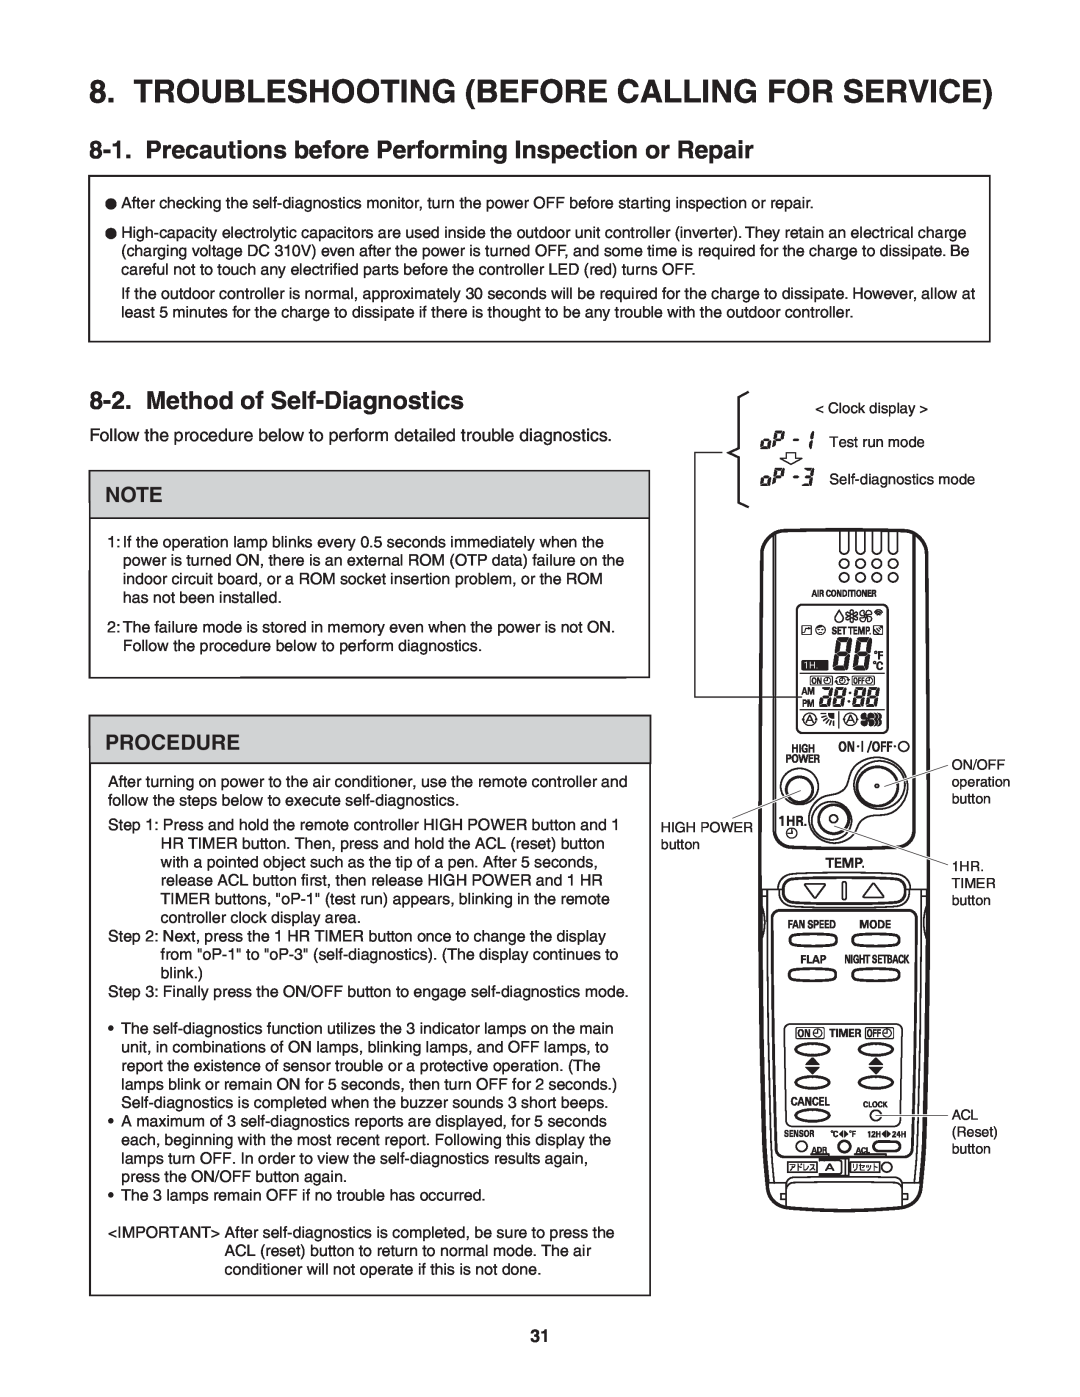 Panasonic R410A service manual Troubleshooting Before Calling For Service, Method of Self-Diagnostics, Procedure 